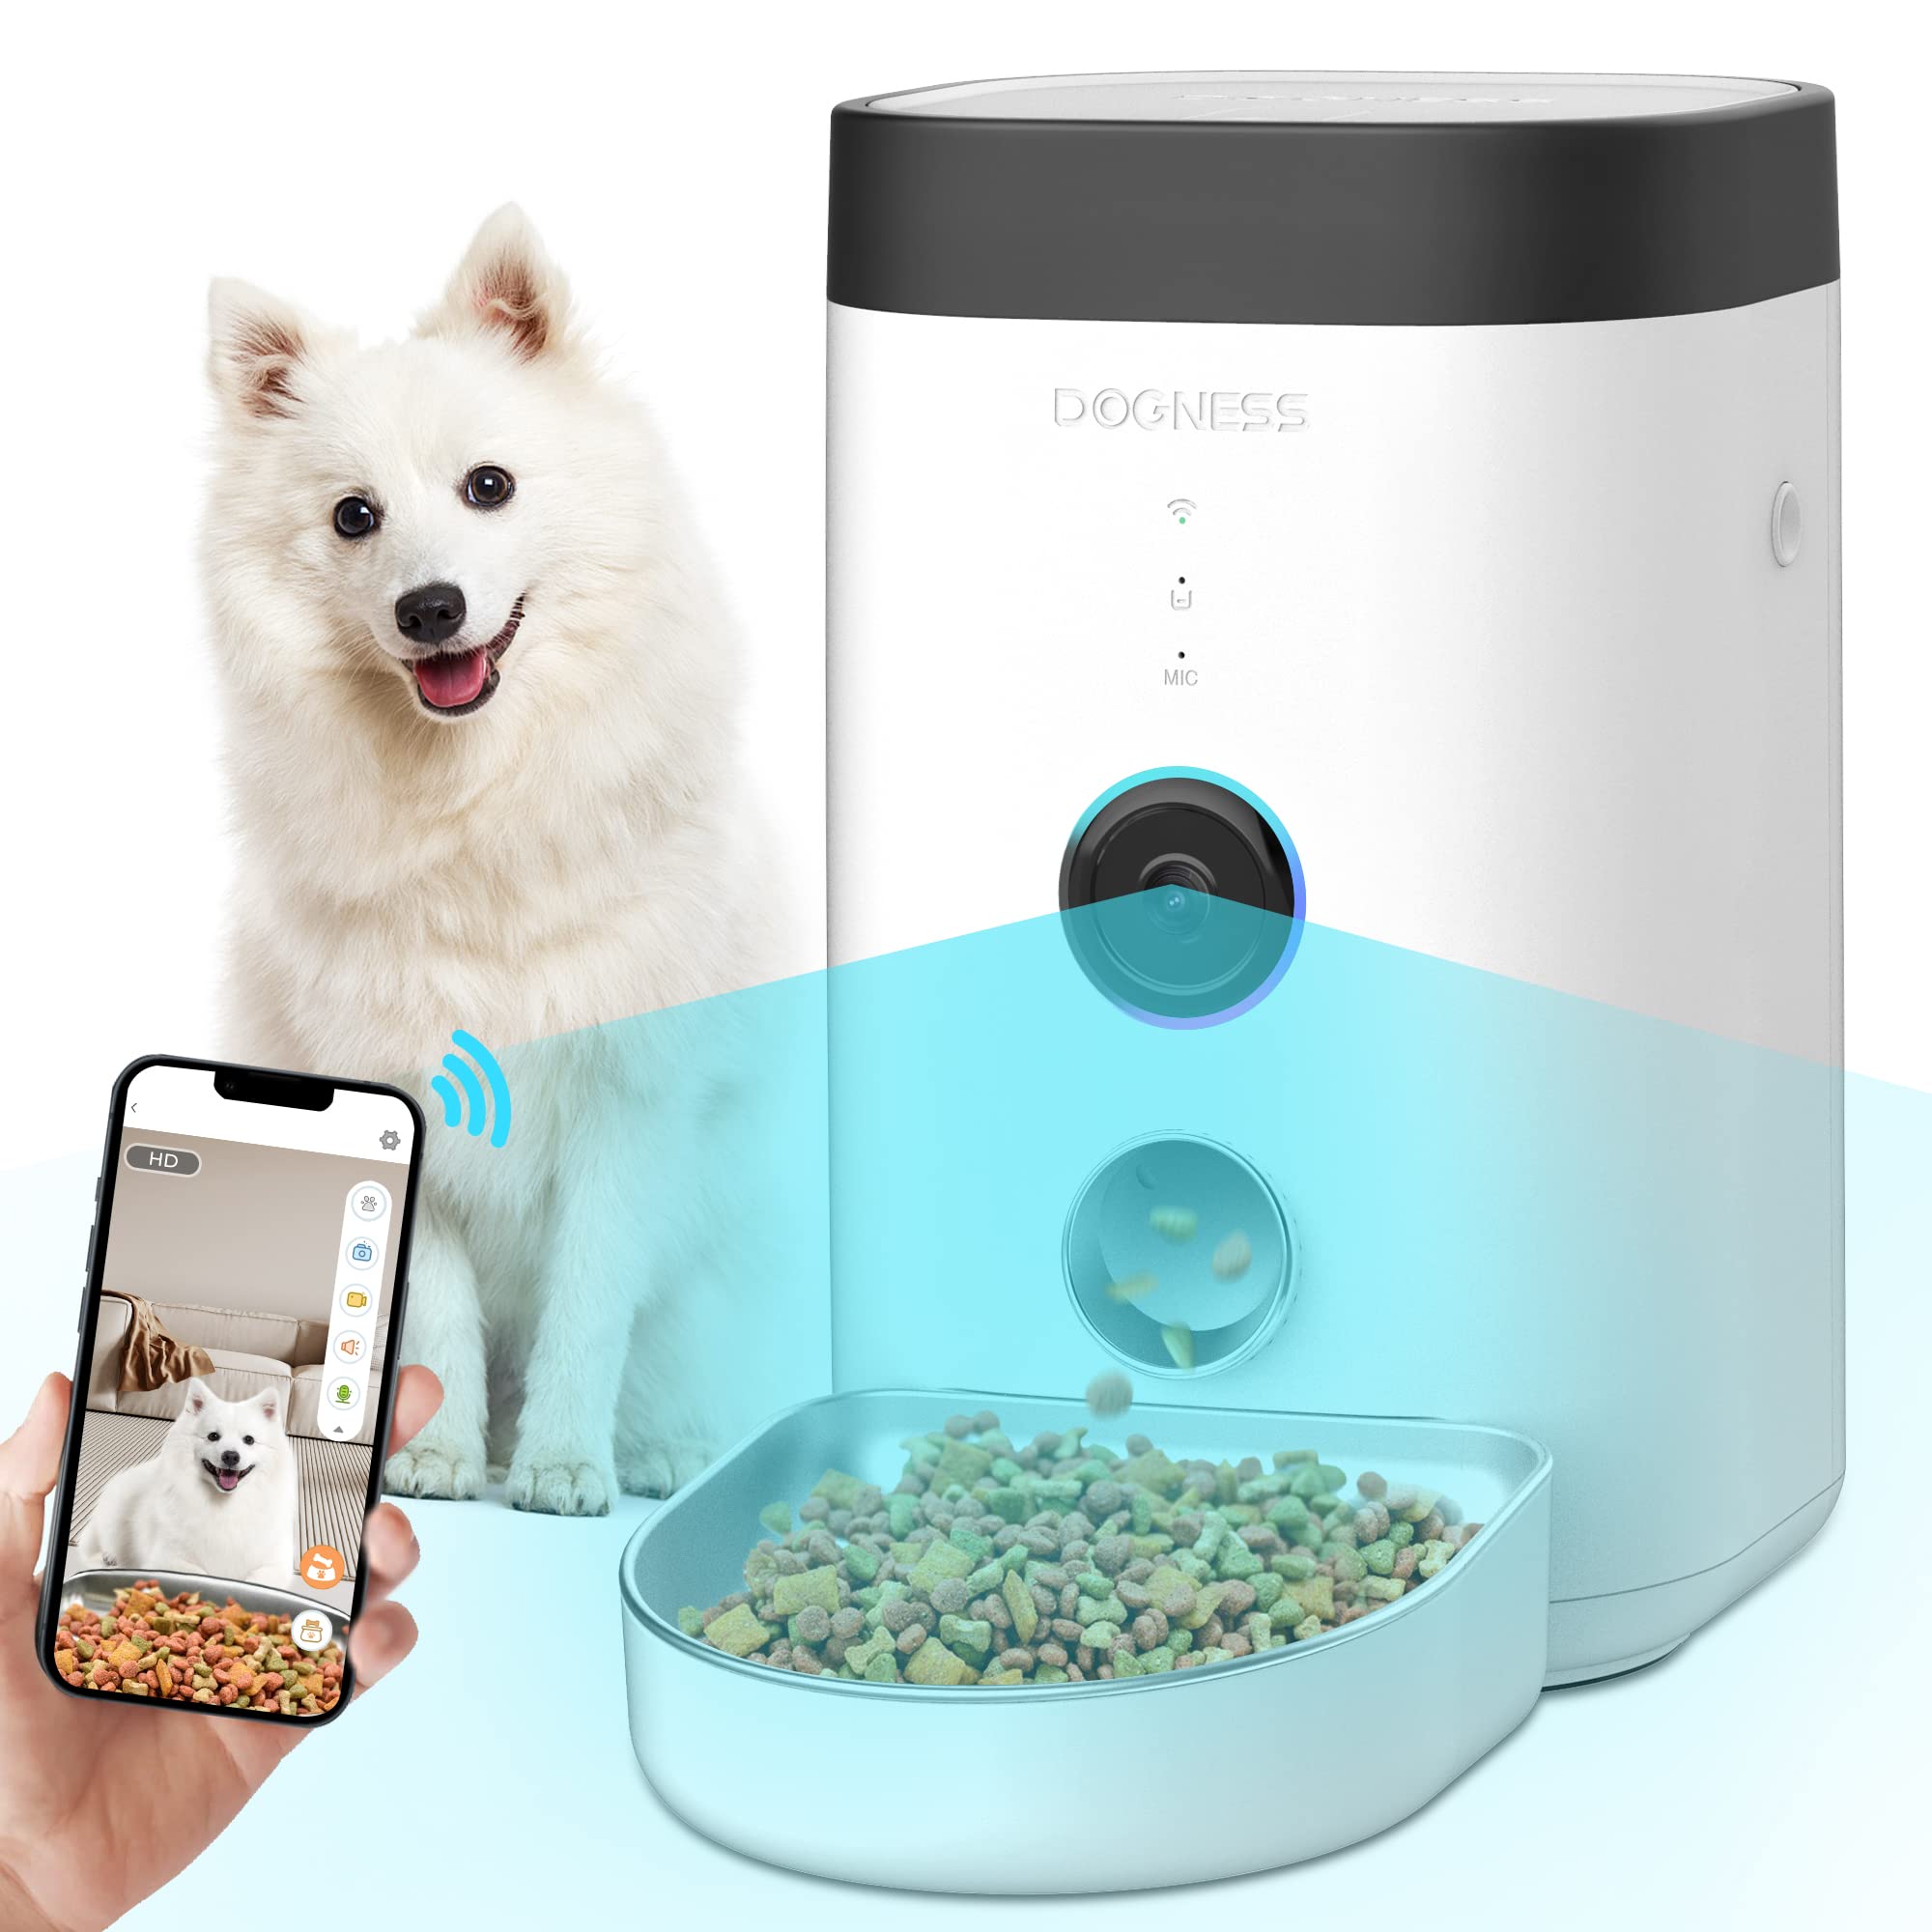 DOgNESS Automatic cat Feeder with camera 1080P HD Video with Night Vision WiFi cat Food Dispenser with 2-Way Audio Low Food & Bl